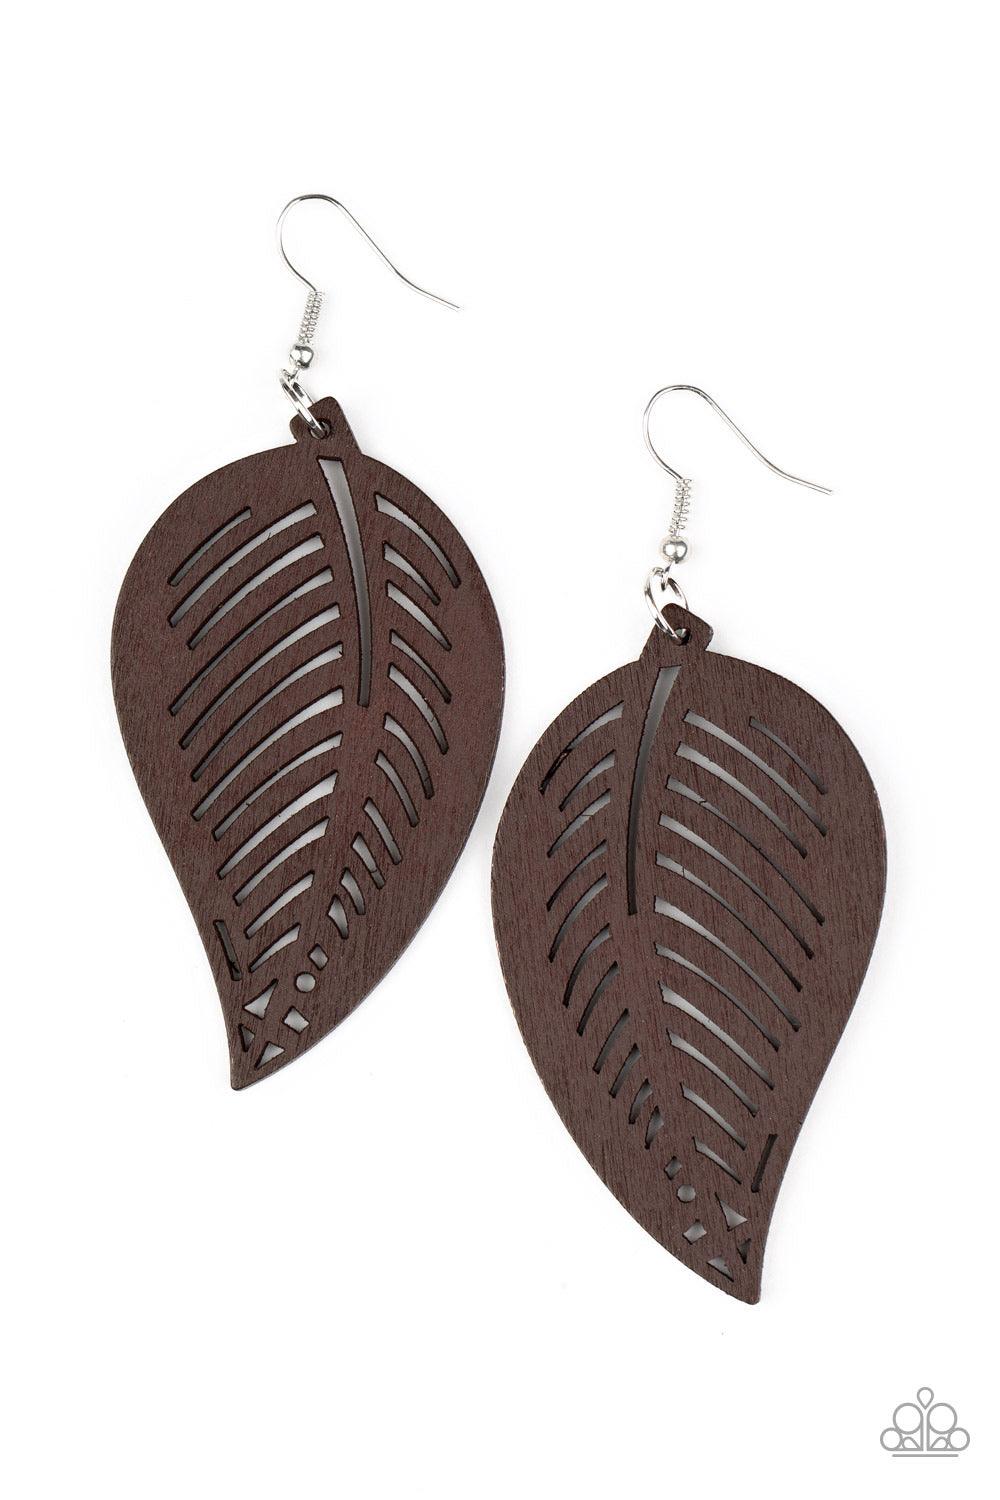 Paparazzi Accessories Tropical Foliage - Brown Brushed in a neutral brown finish, a wooden frame is delicately cut into an airy leaf pattern for a seasonal flair. Earring attaches to a standard fishhook fitting. Sold as one pair of earrings. Jewelry